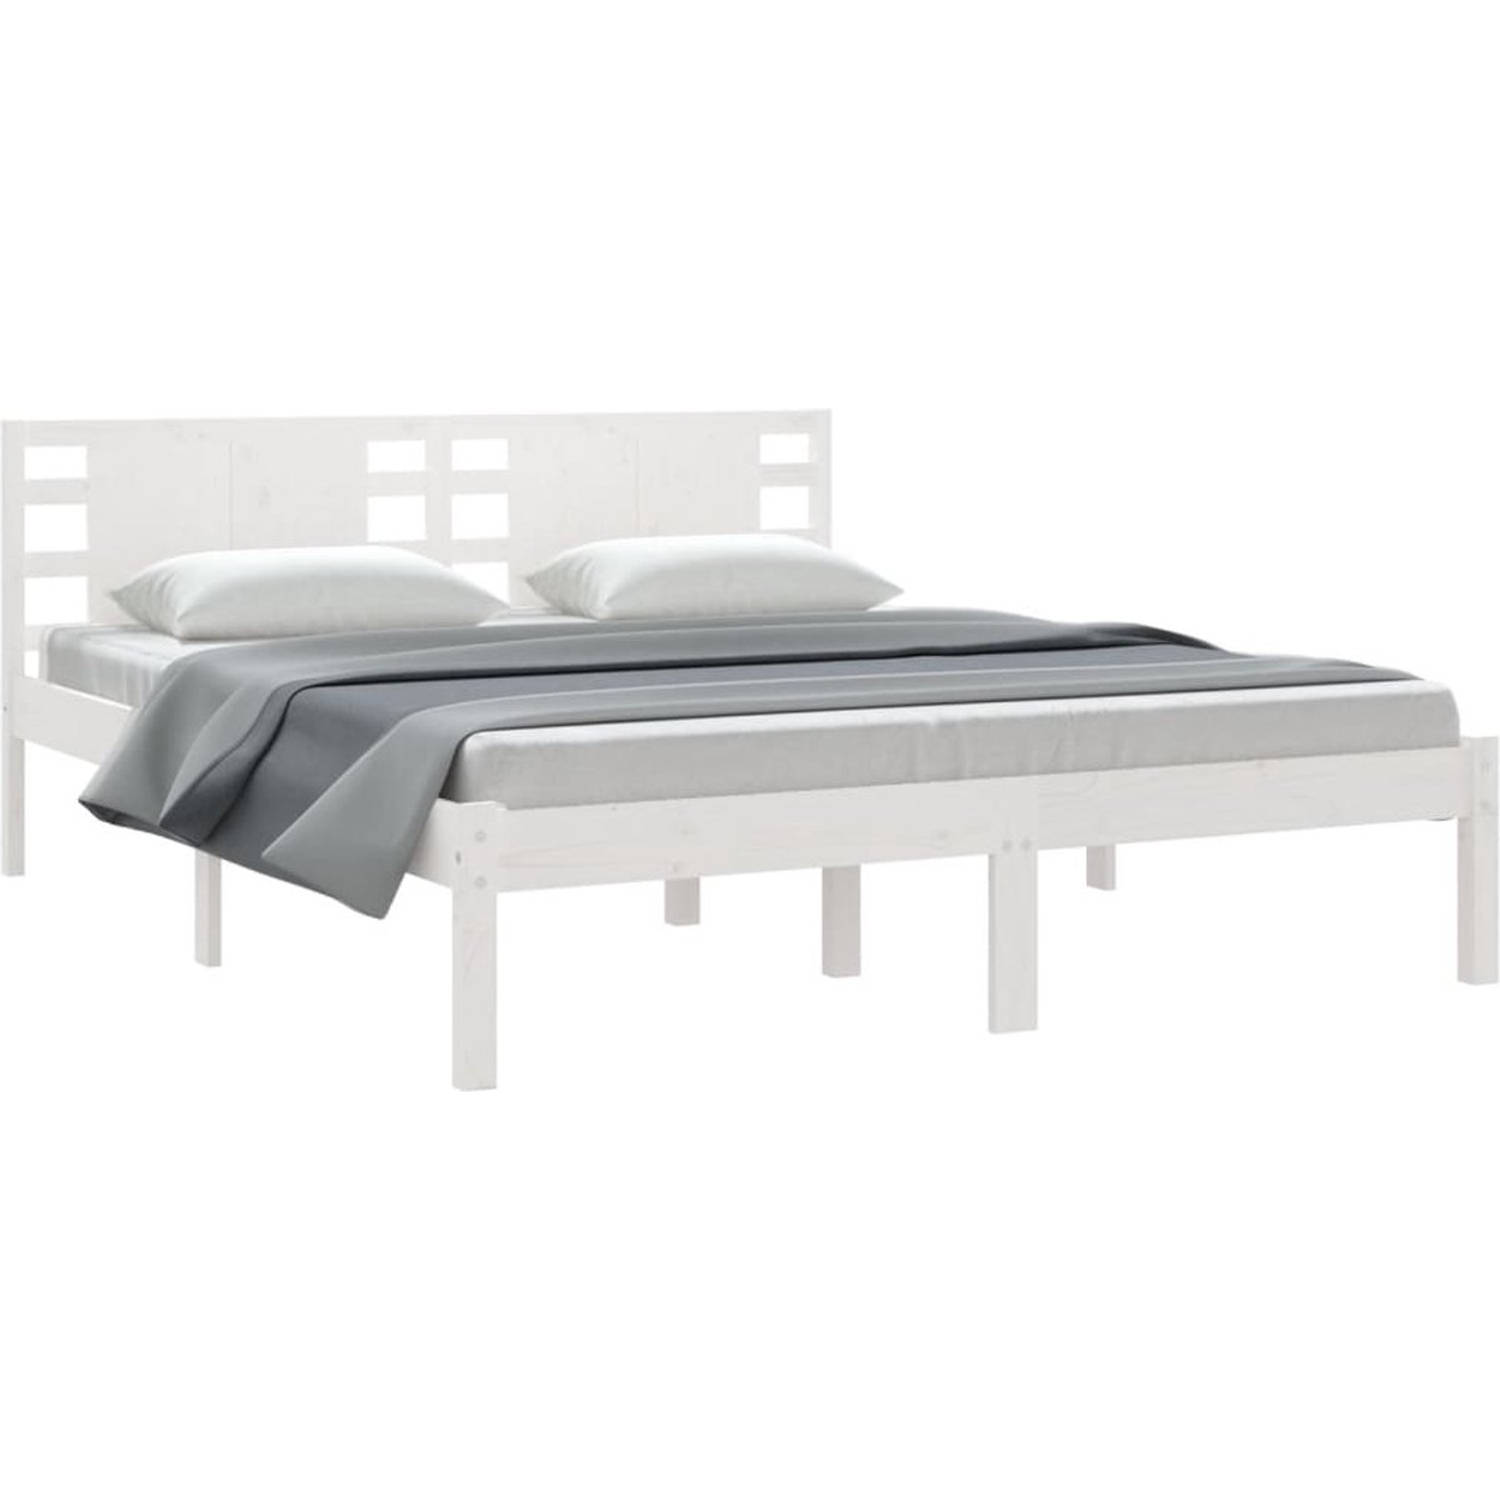 The Living Store Bedframe Massief Grenenhout - 160x200 cm - Wit